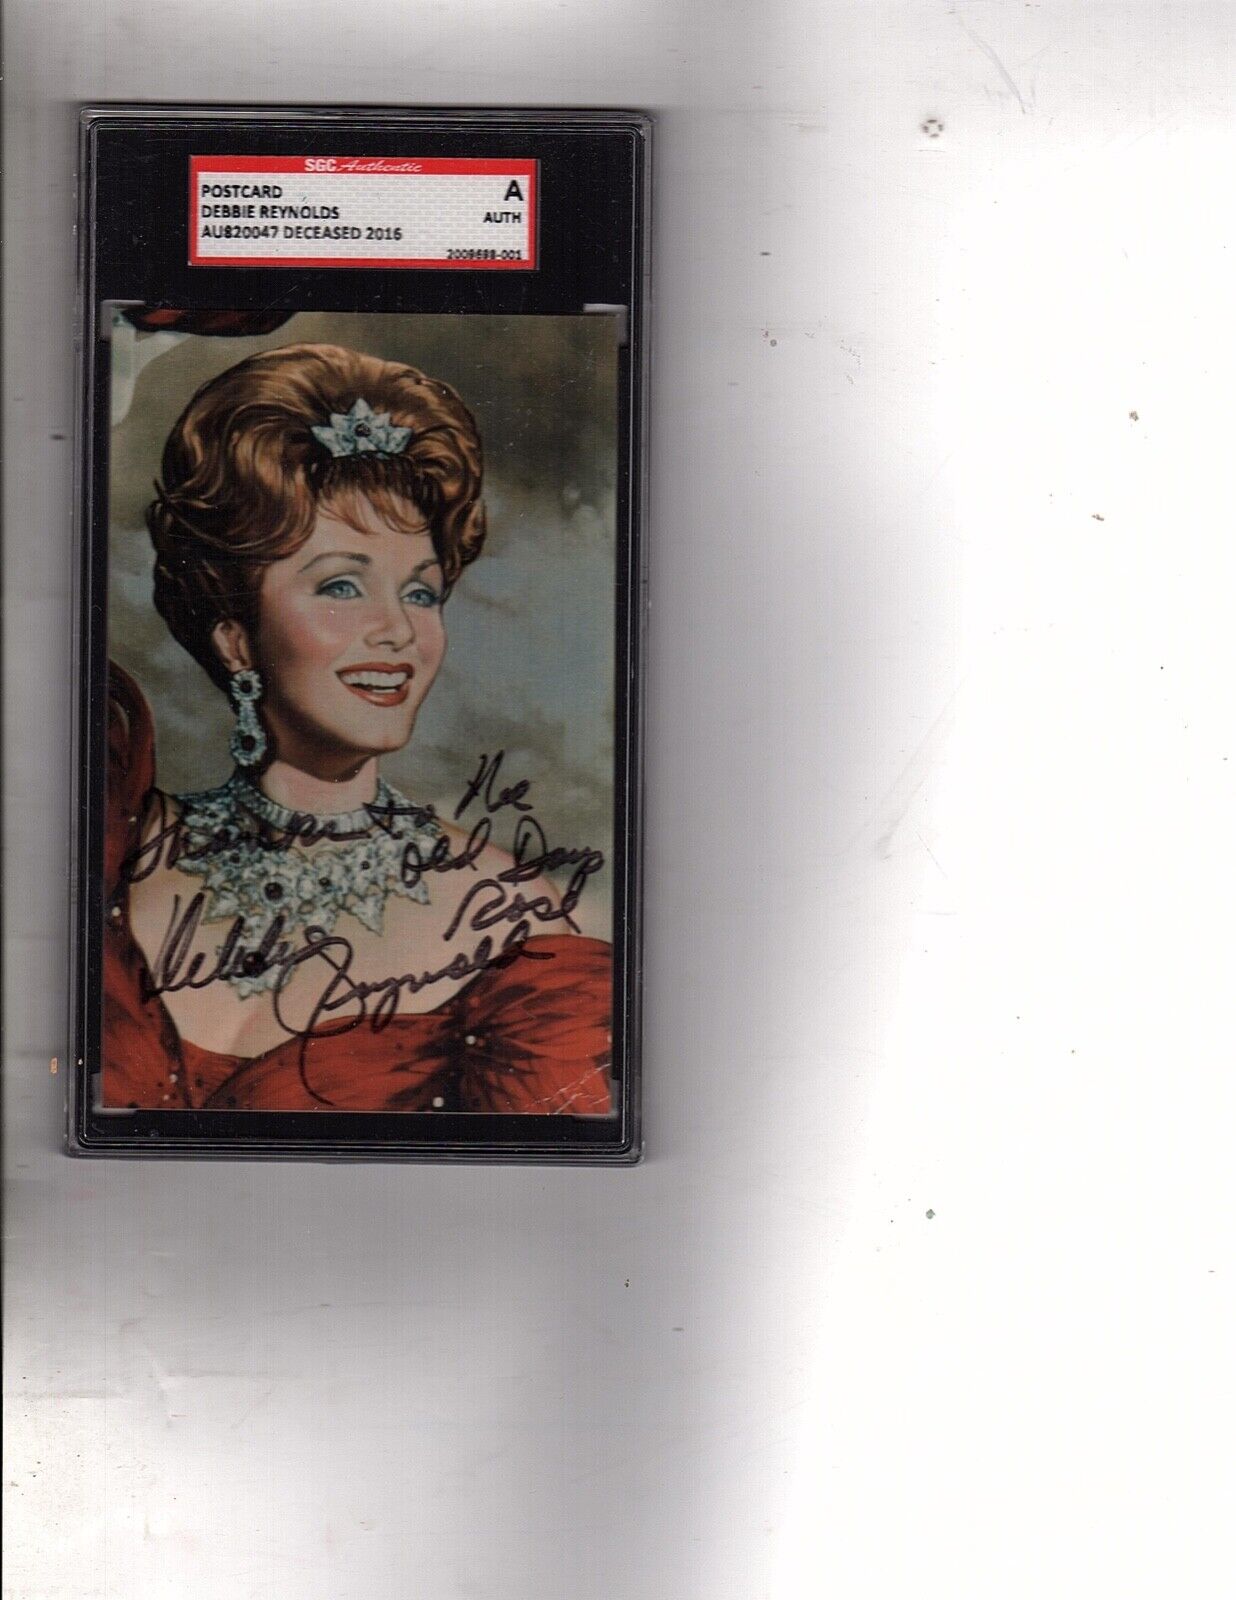 DEBBIE REYNOLDS HAND SIGNED post card Authenticated AU920047  SGC authentic (bb8